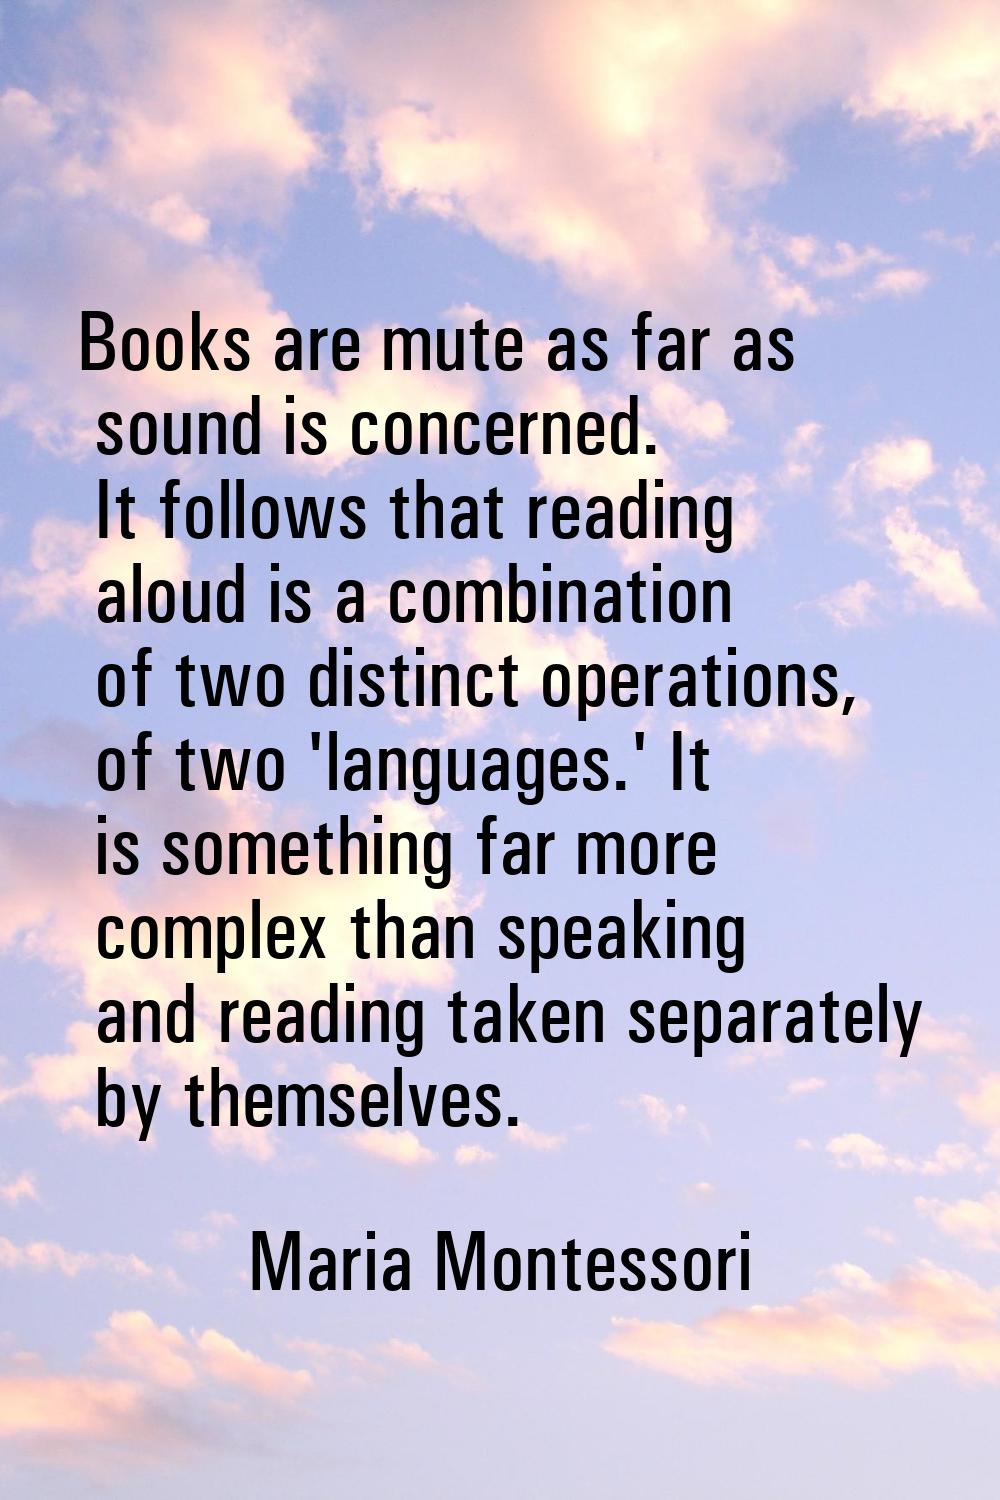 Books are mute as far as sound is concerned. It follows that reading aloud is a combination of two 